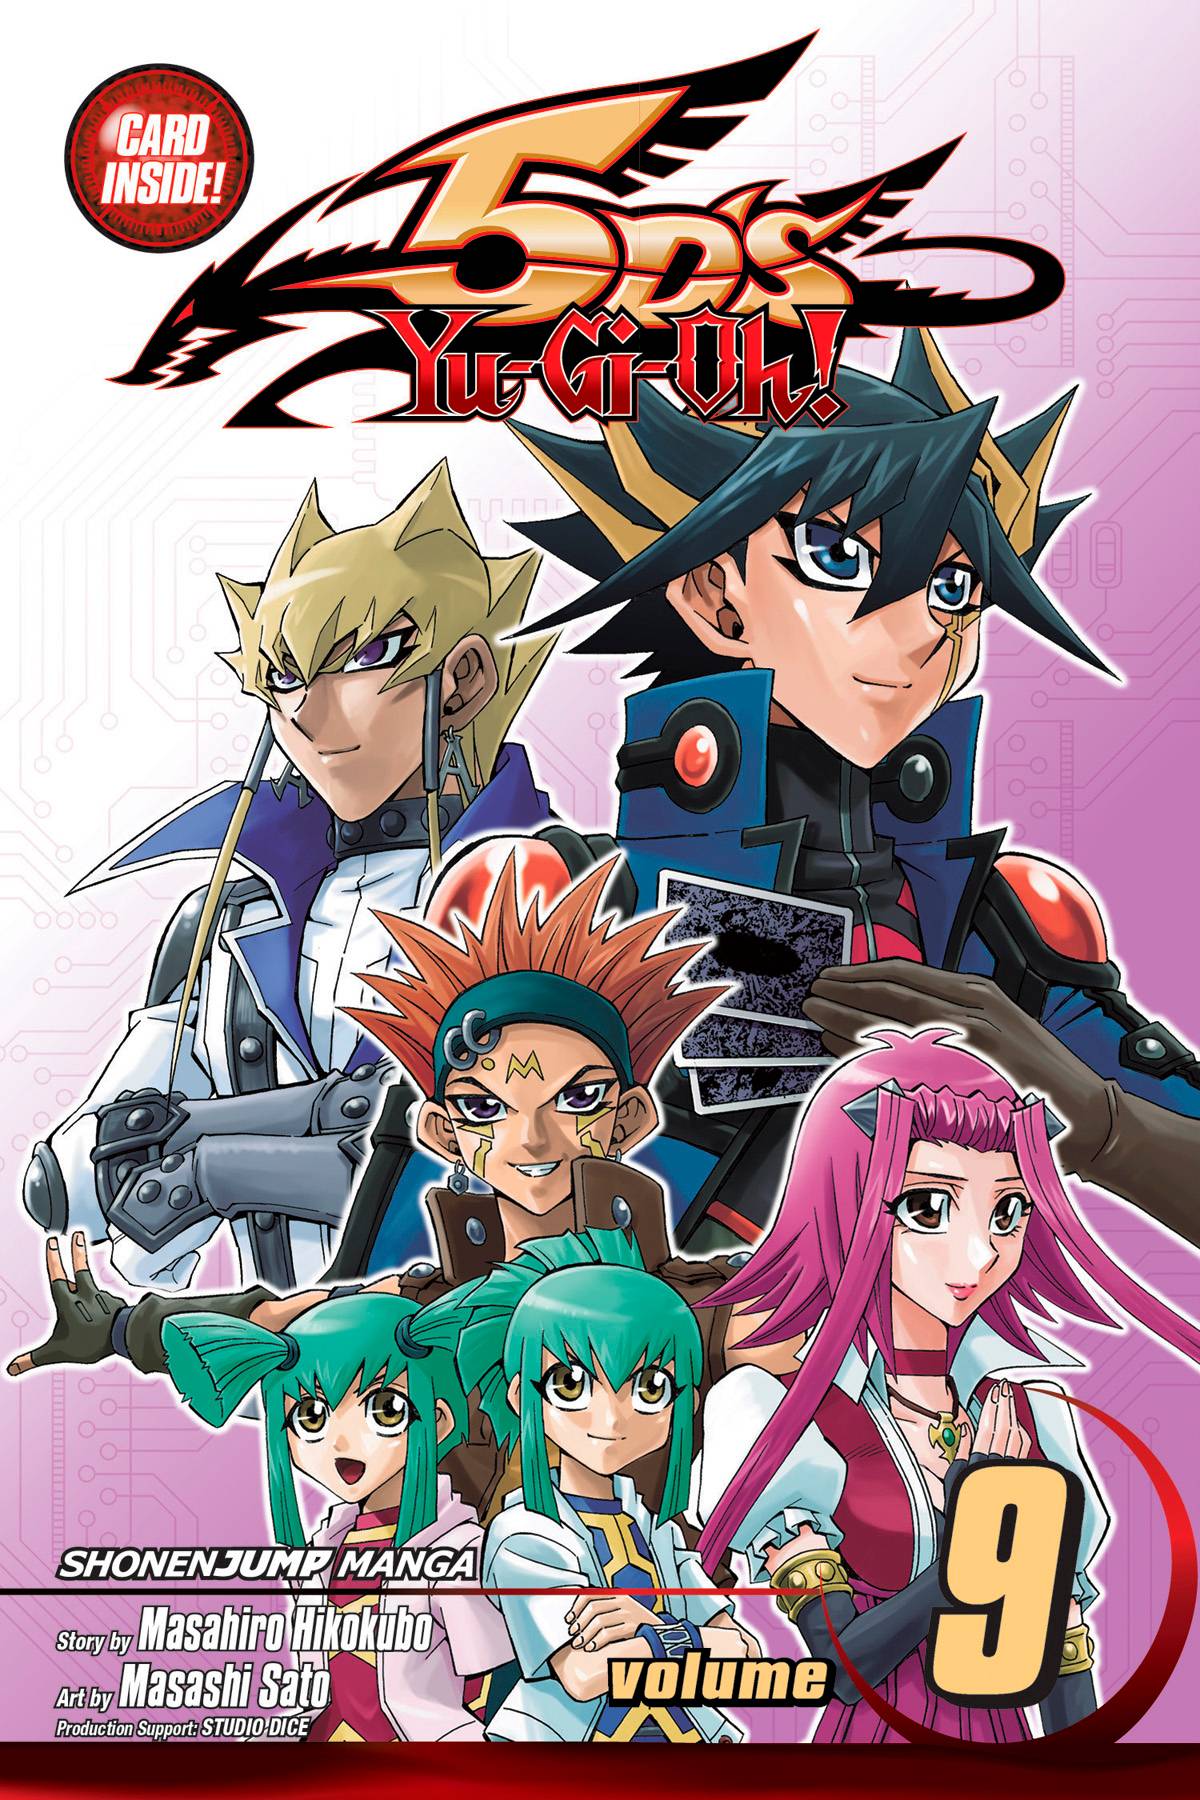 YU GI OH 5DS GN VOL 09